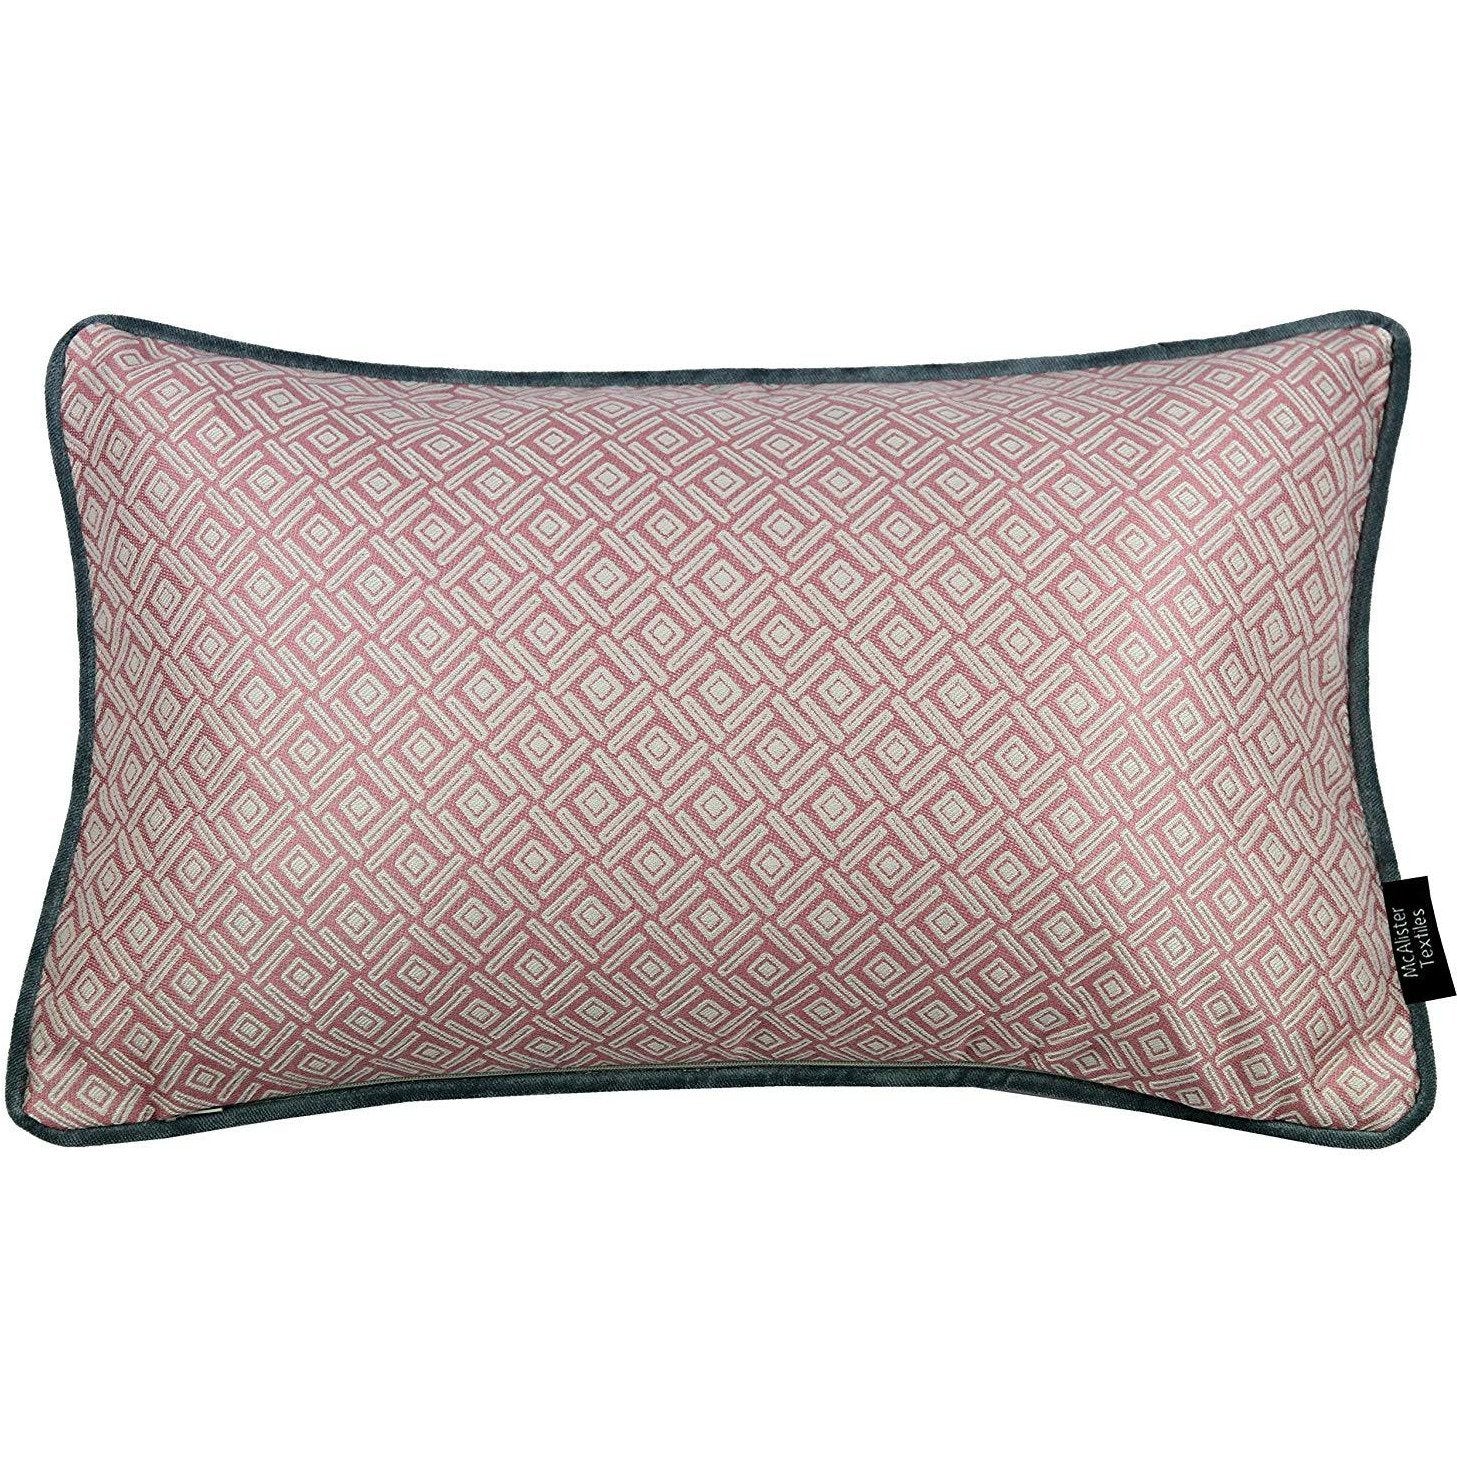 McAlister Textiles Elva Geometric Blush Pink Cushion Cushions and Covers Cover Only 50cm x 30cm 